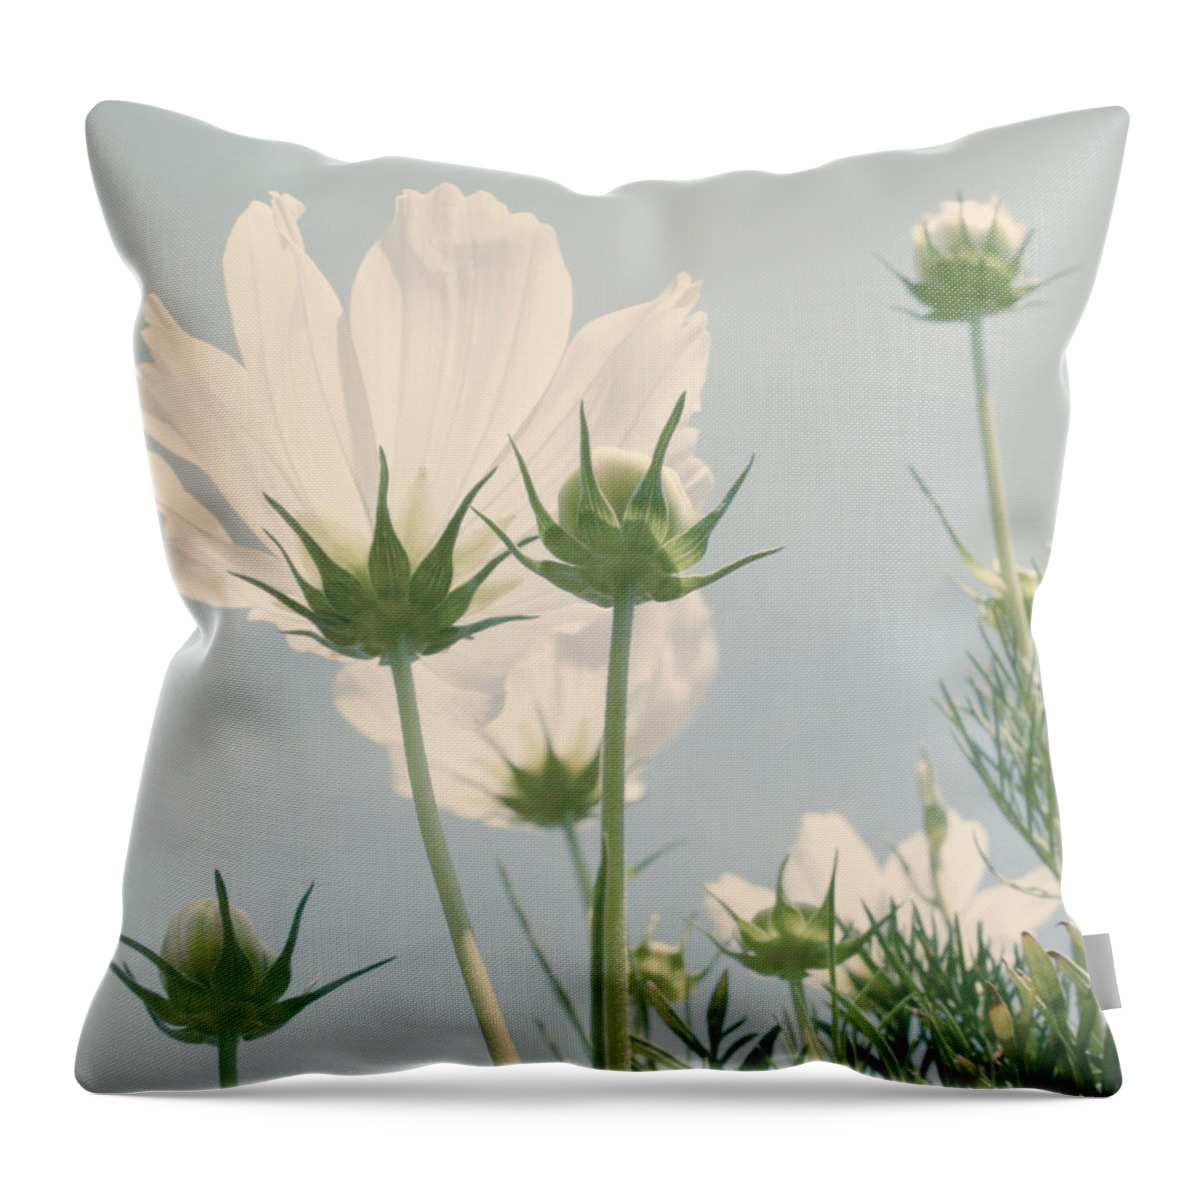 Flower Throw Pillow featuring the photograph Looking Up by Kim Hojnacki